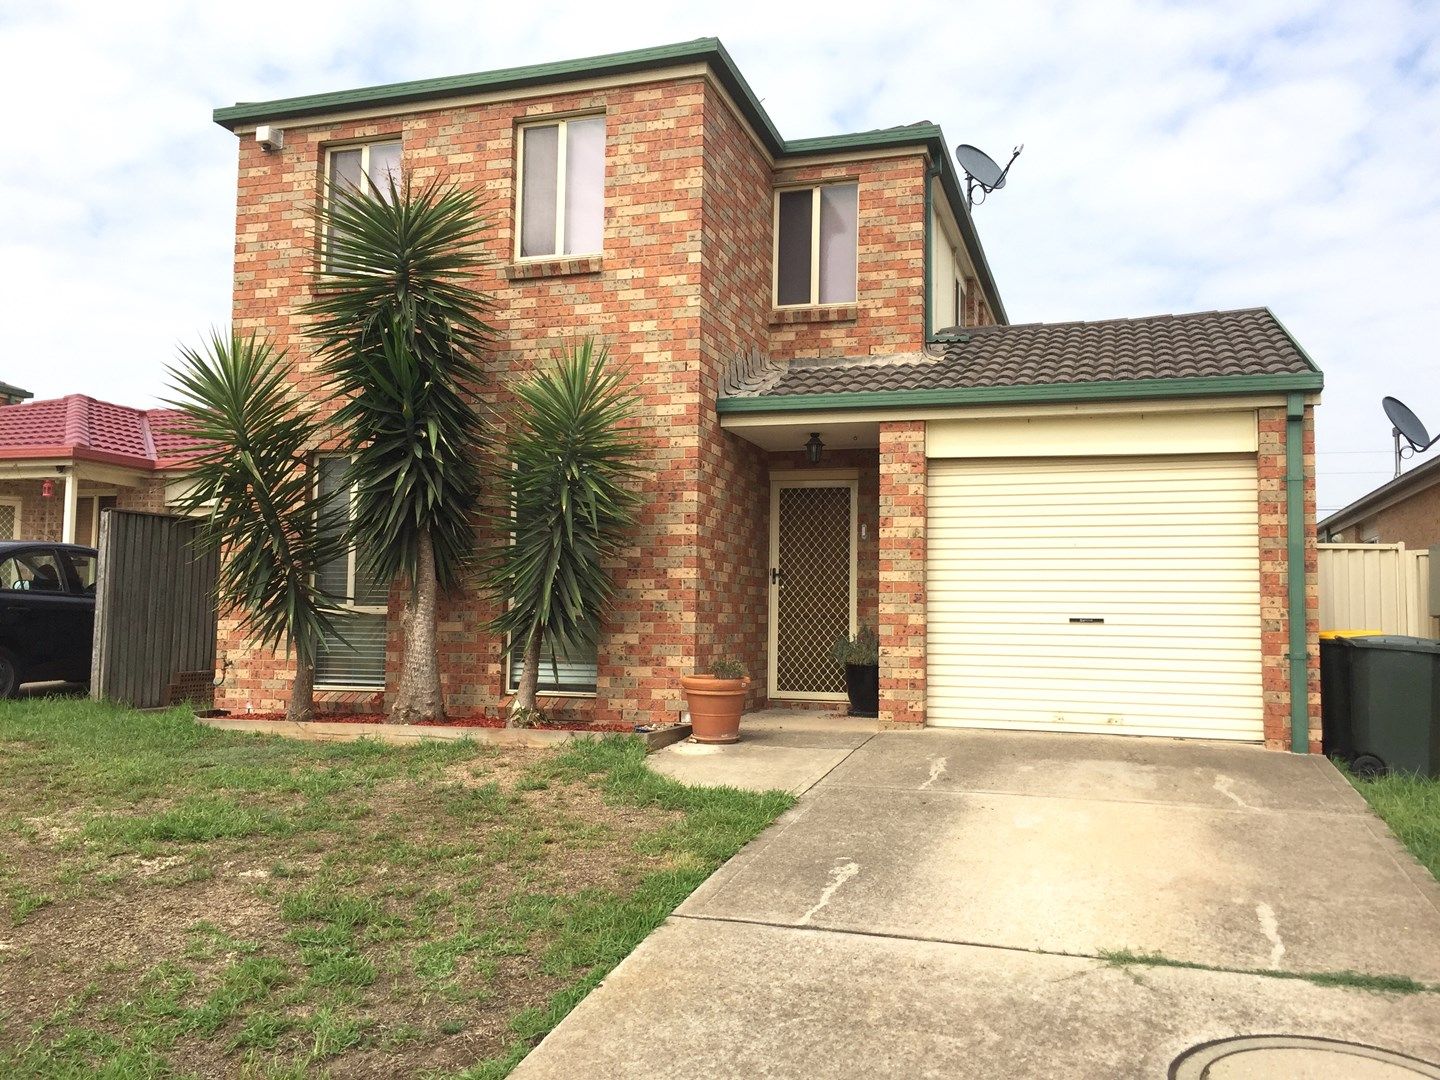 71 Manorhouse Blvd, Quakers Hill NSW 2763, Image 0